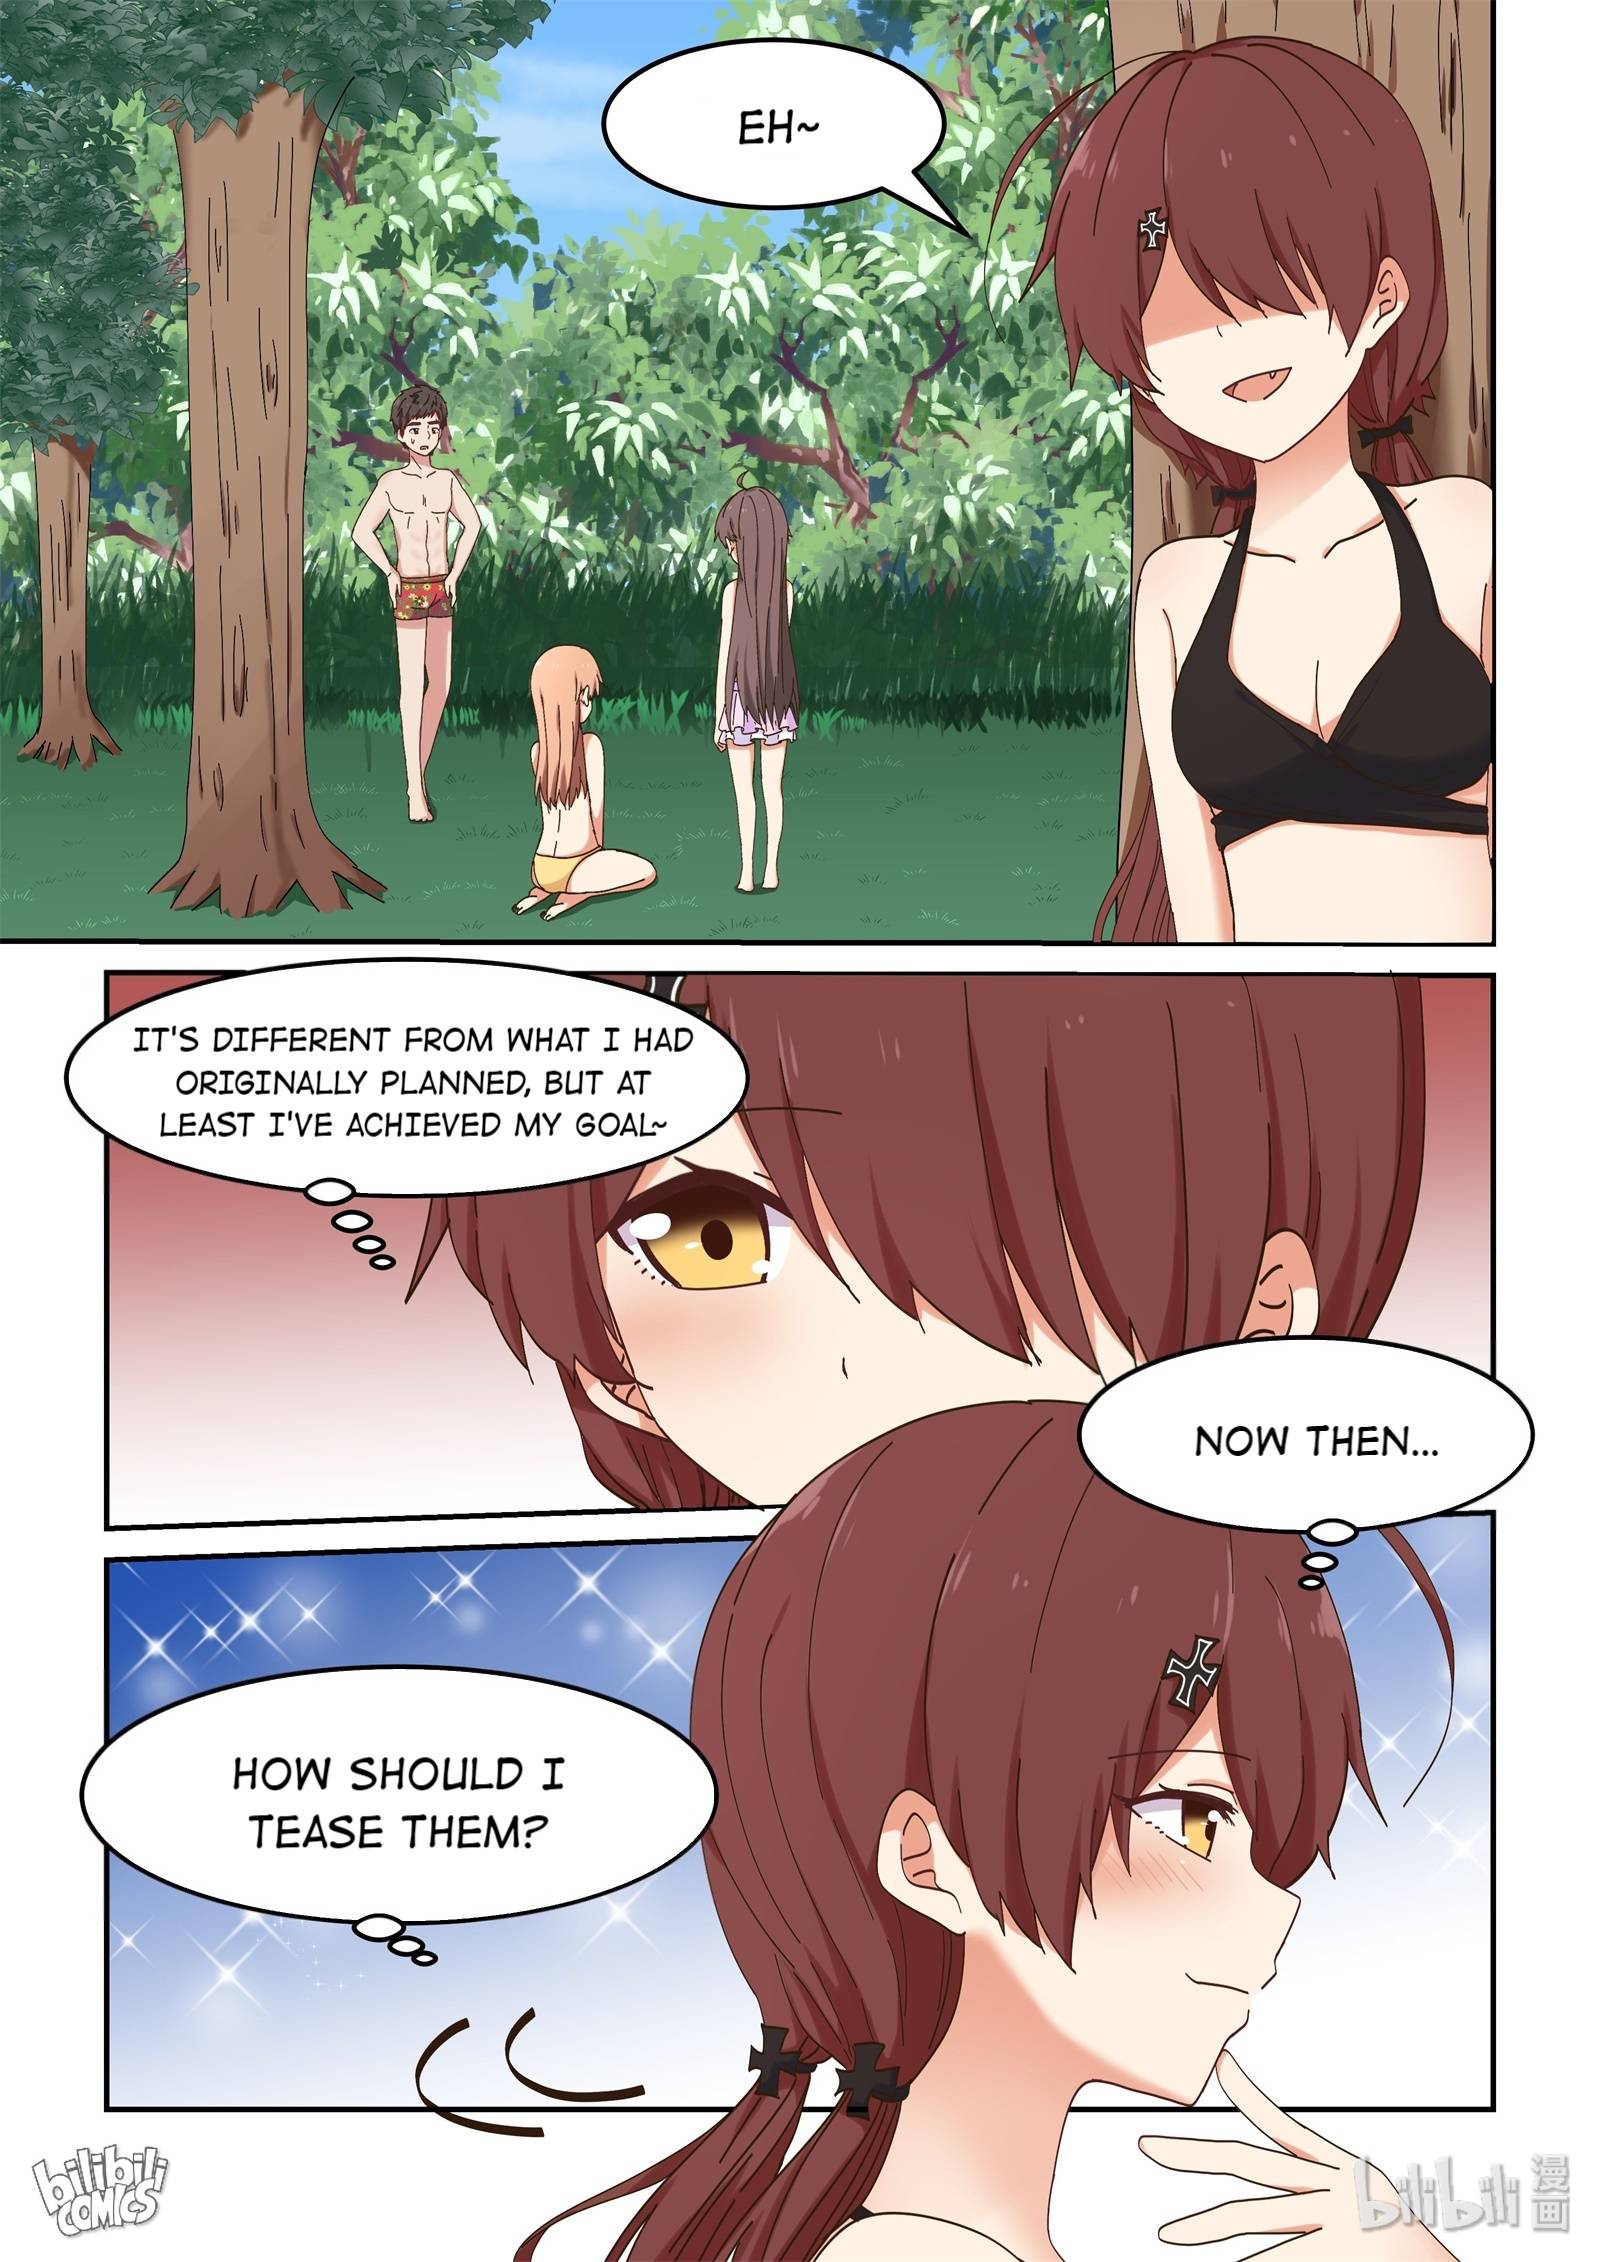 I Decided To Offer Myself To Motivate Senpai - Page 2